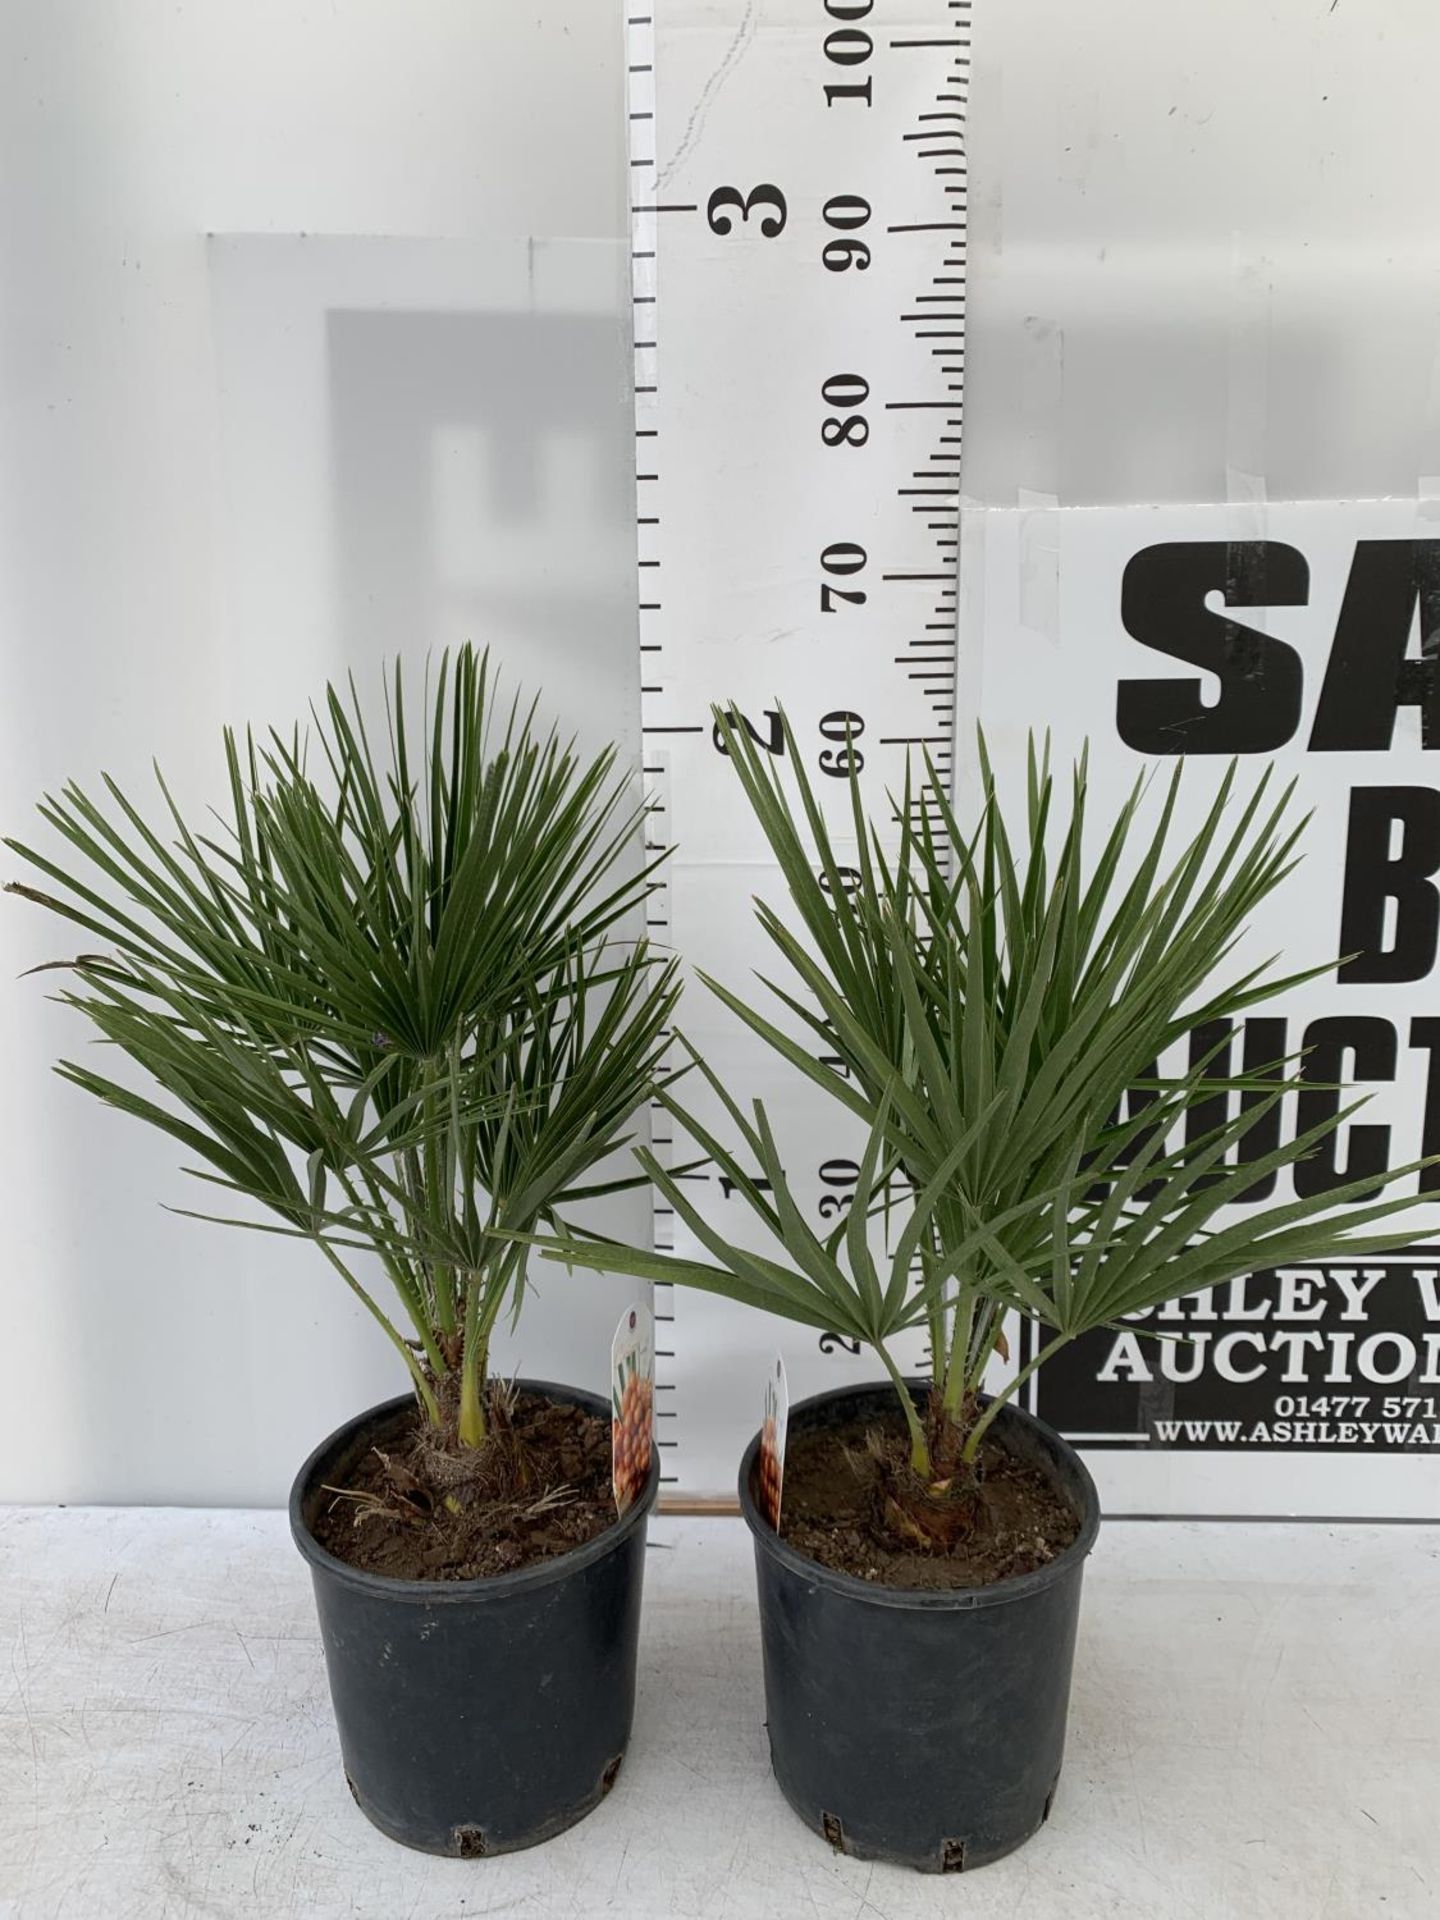 TWO CHAMAEROPS HUMILIS HARDY IN 3 LTR POTS APPROX 60CM IN HEIGHT PLUS VAT TO BE SOLD FOR THE TWO - Image 2 of 6